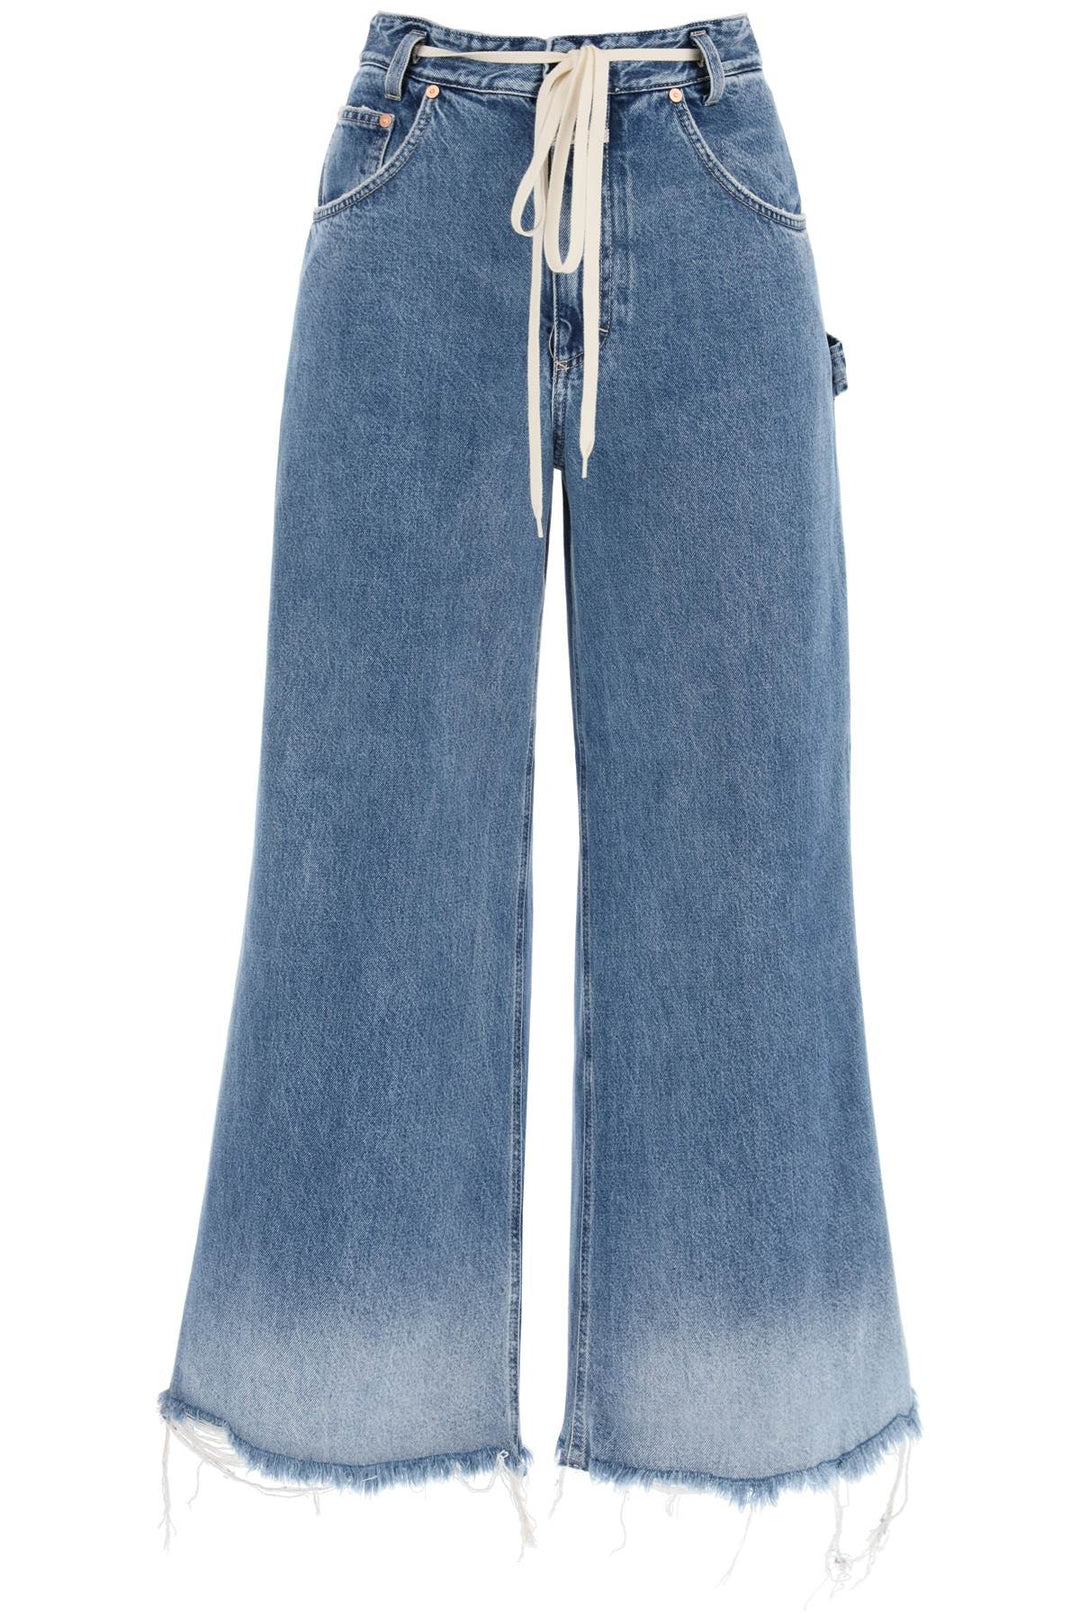 Closed Flare Morus Jeans With Distressed Details   Blu